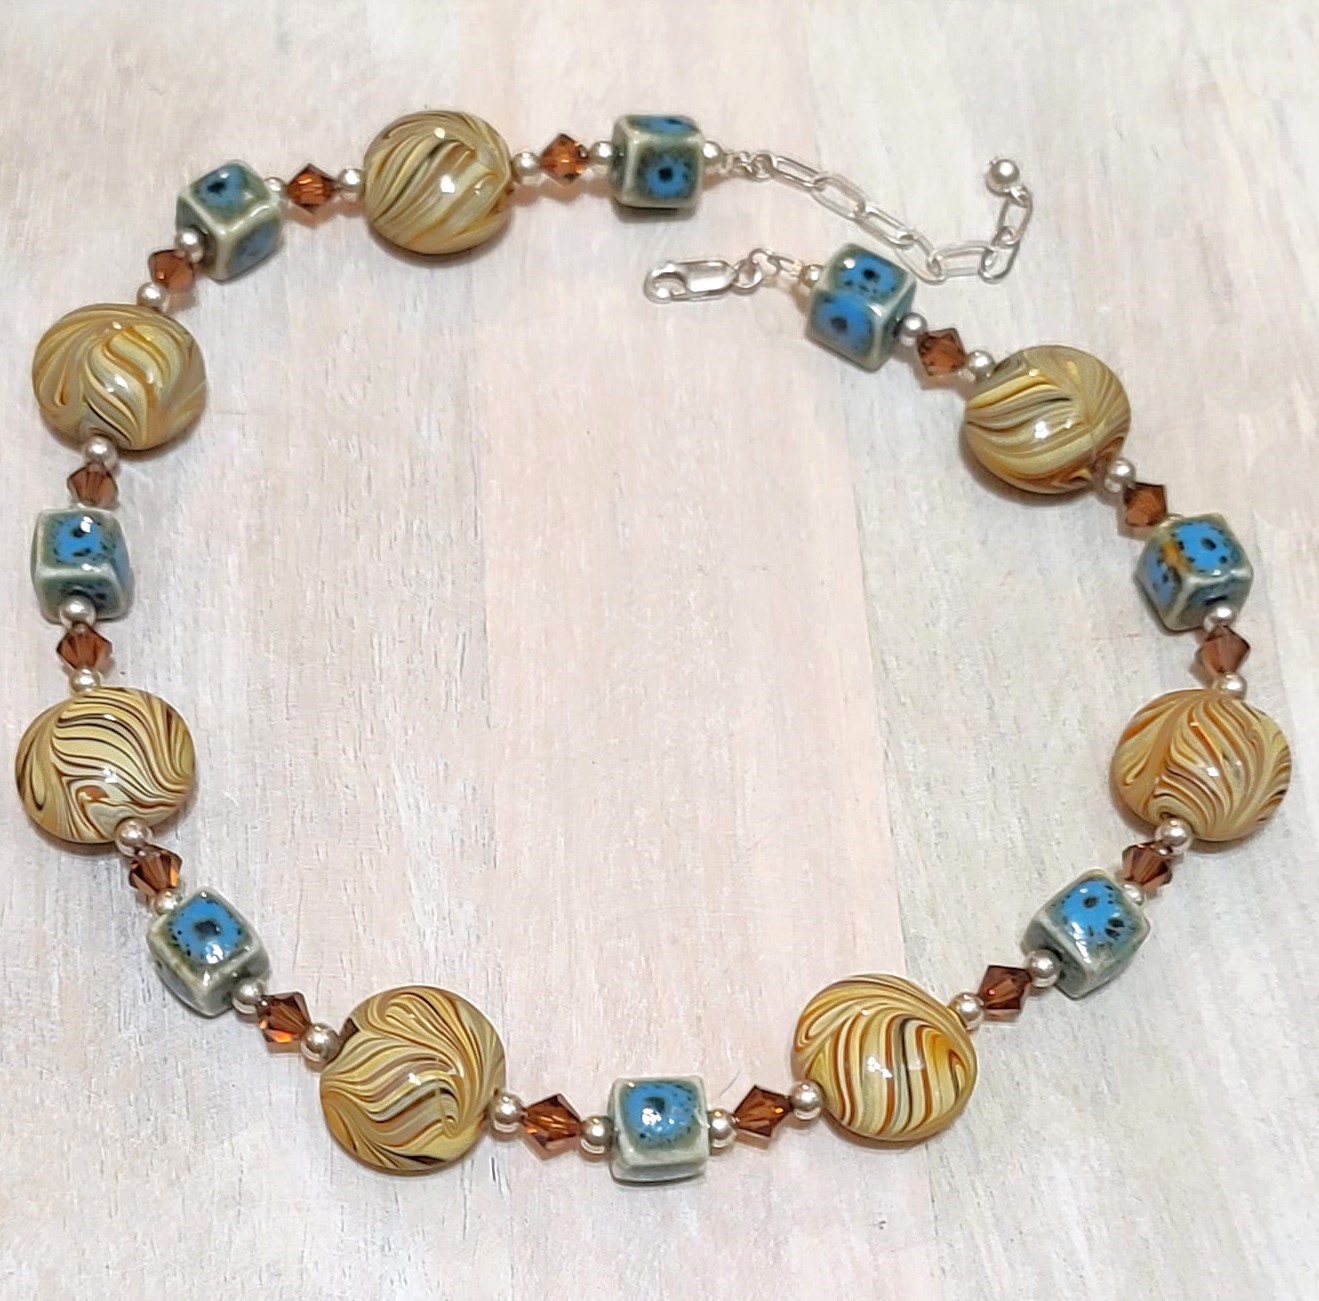 Swirl glass beads, ceramic and austrian crystals, handrafted, sterling silver chain and clasp